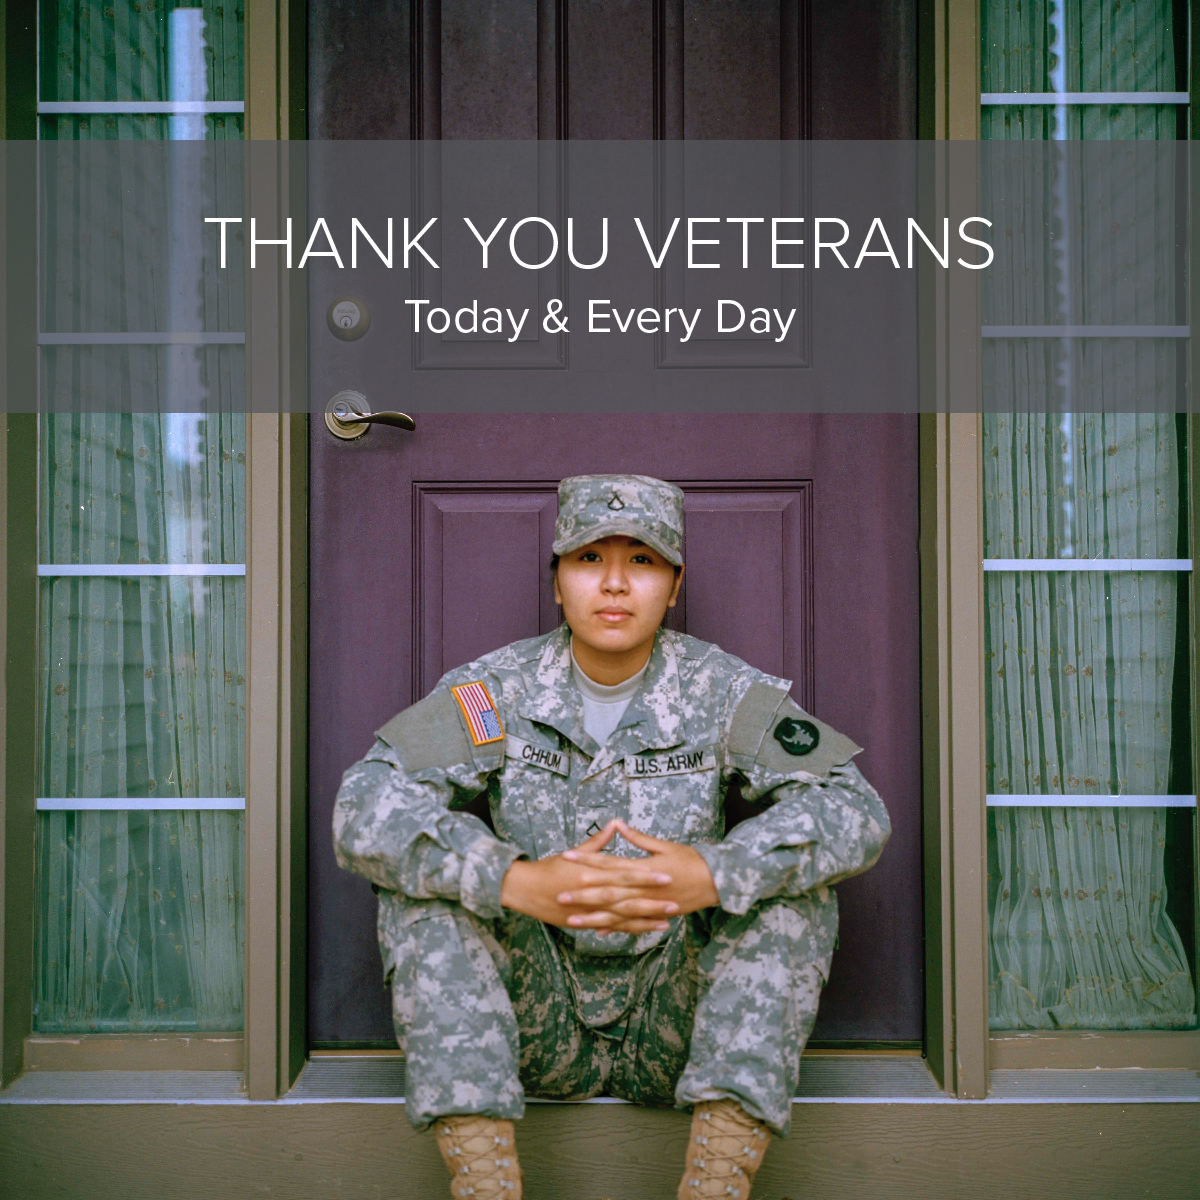 Thank You Veterans Today & Every Day